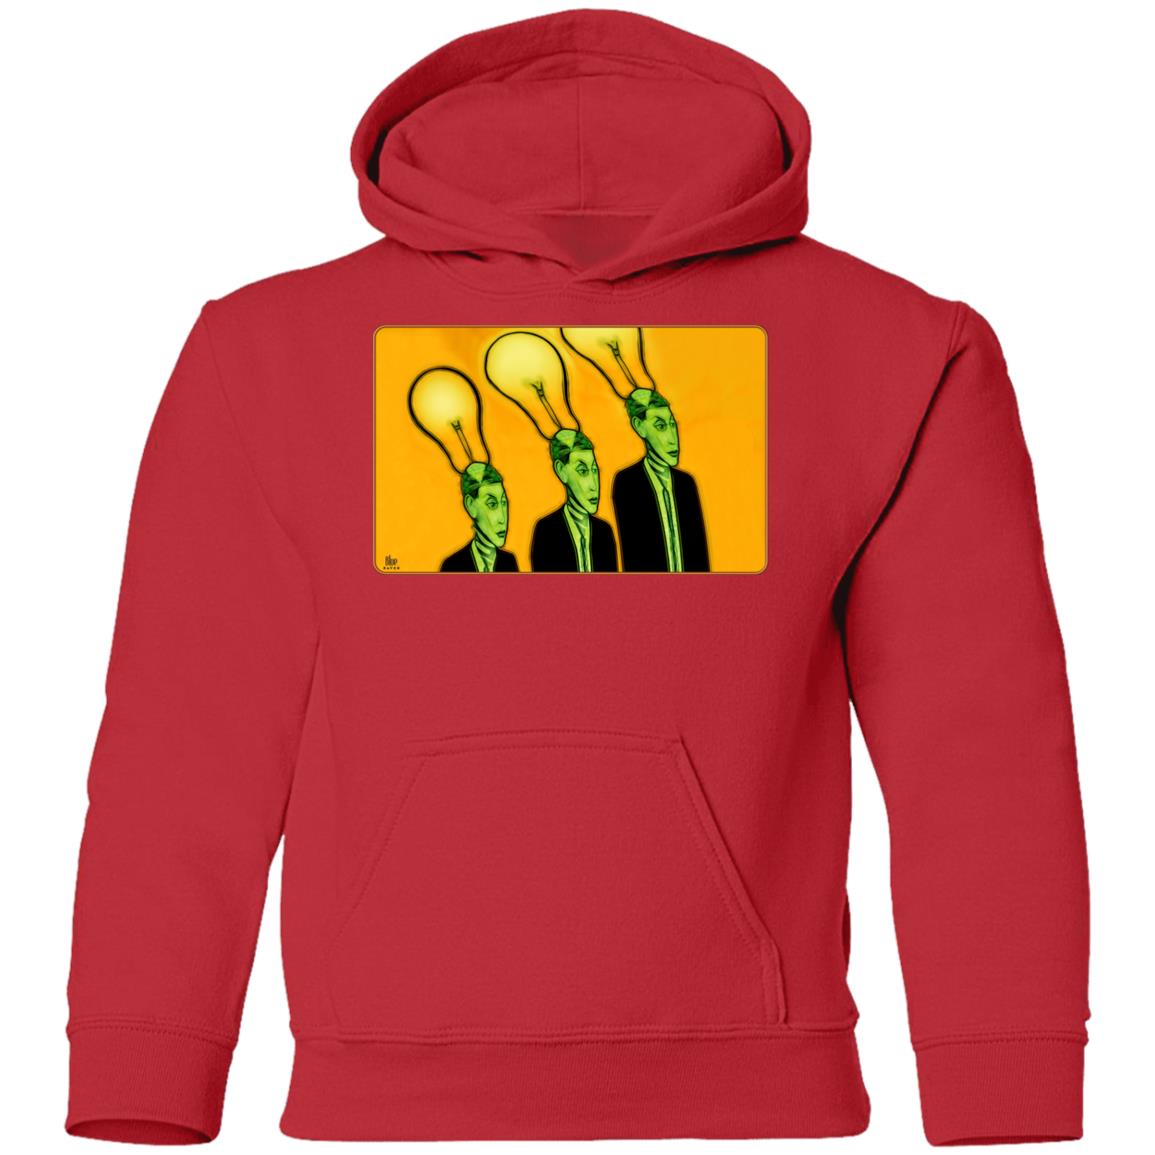 Brighter Idea - Youth Hoodie